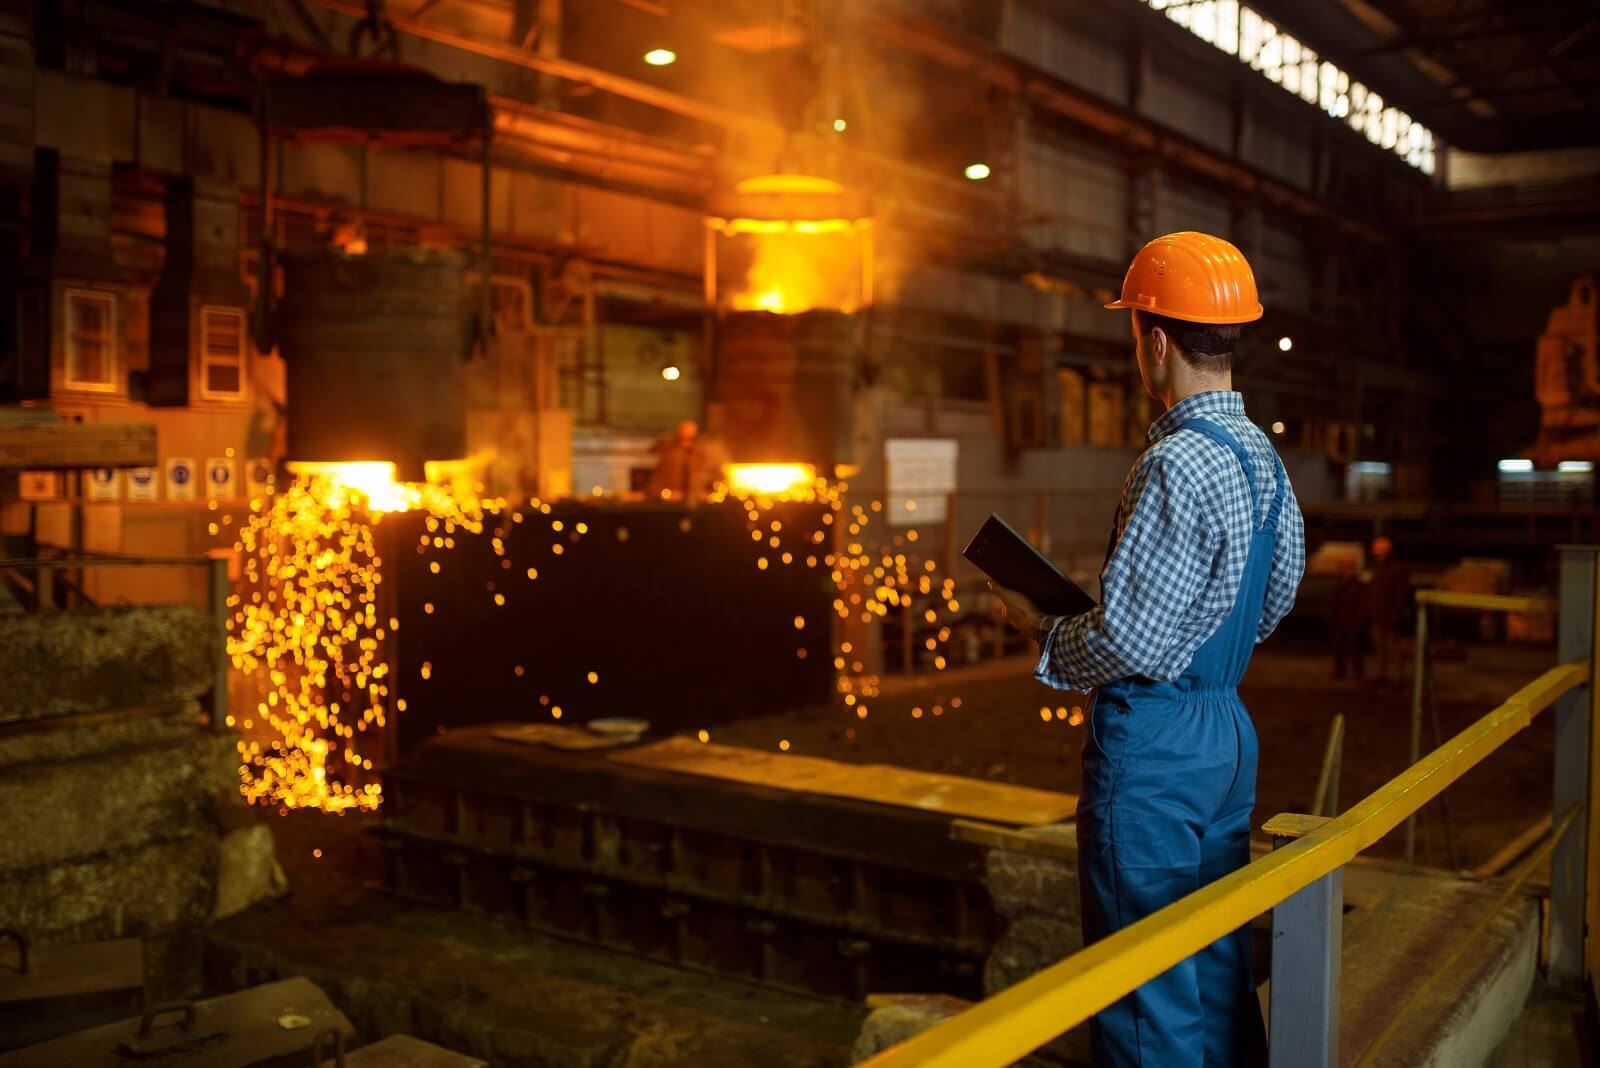 World crude steel production data were announced: Turkey's steel production also decreased in January